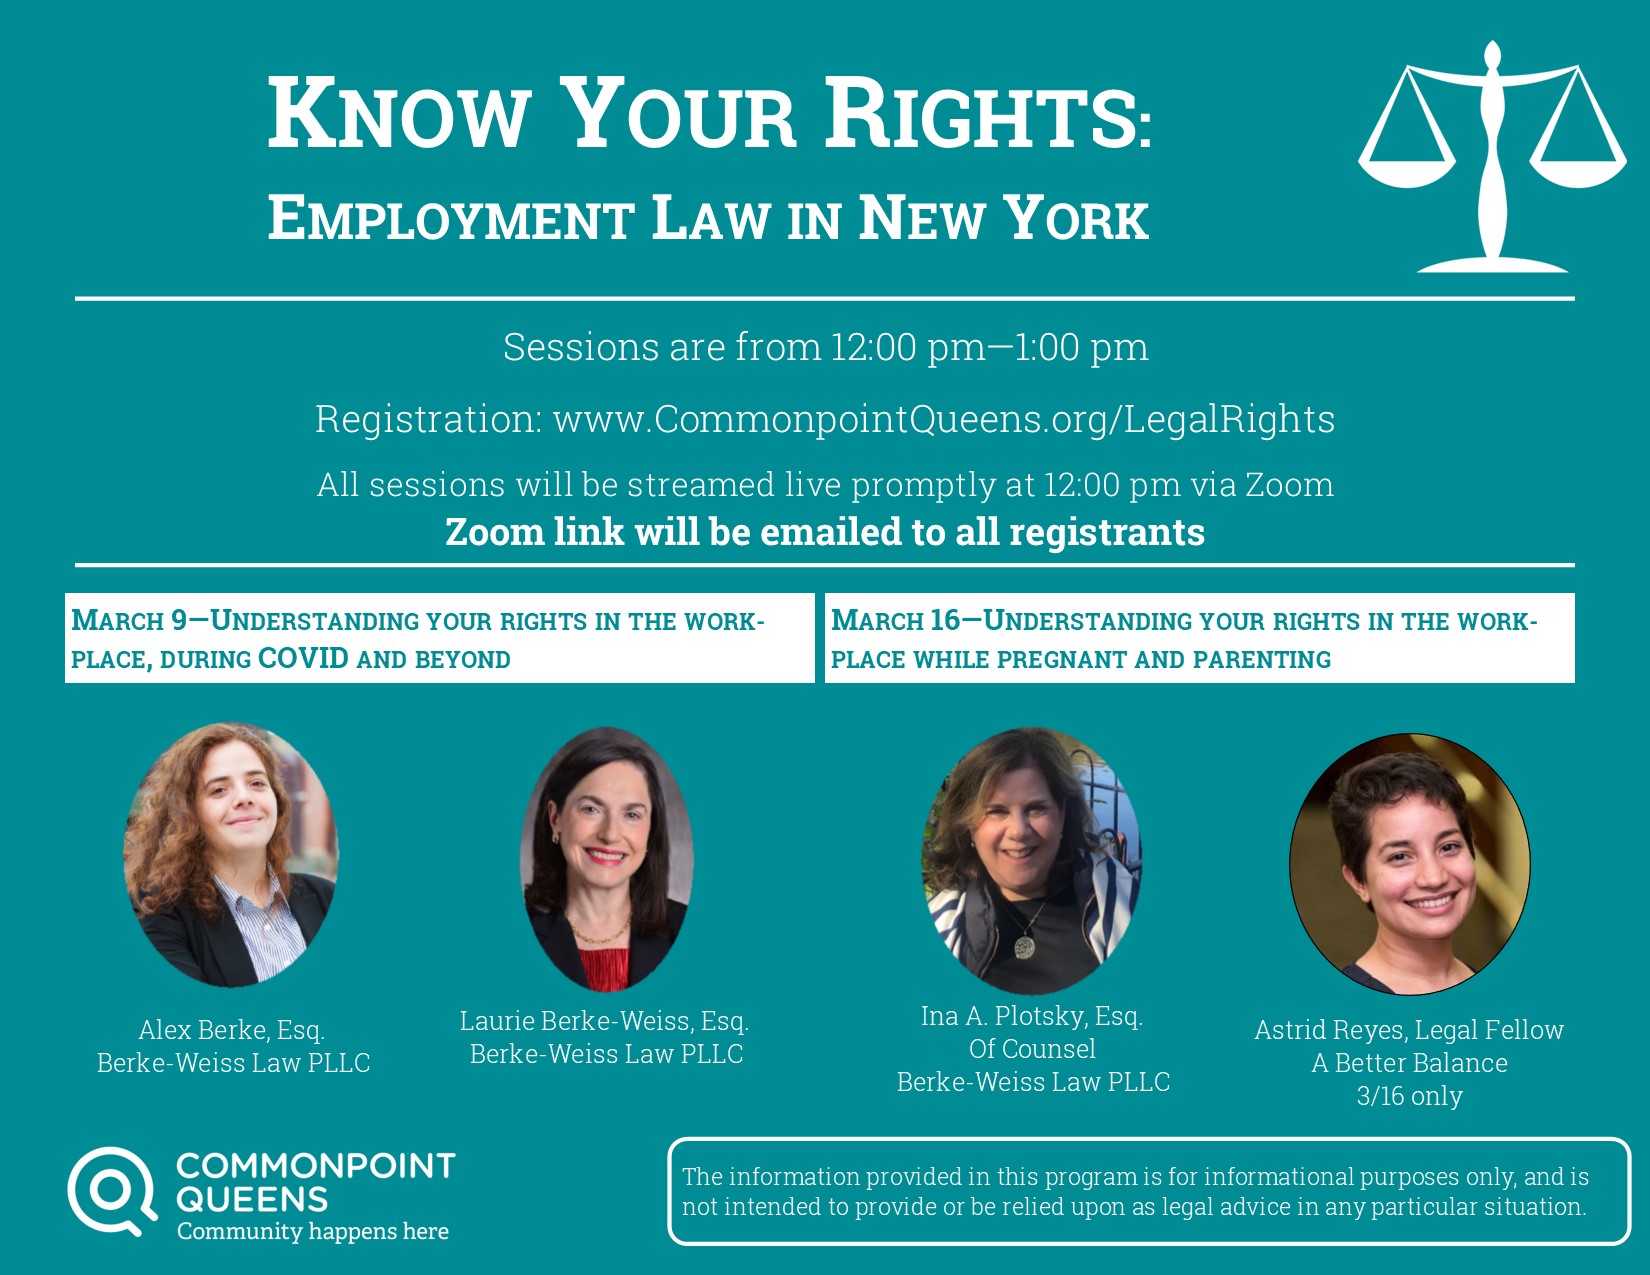 Know Your Rights: Employment Law in New York